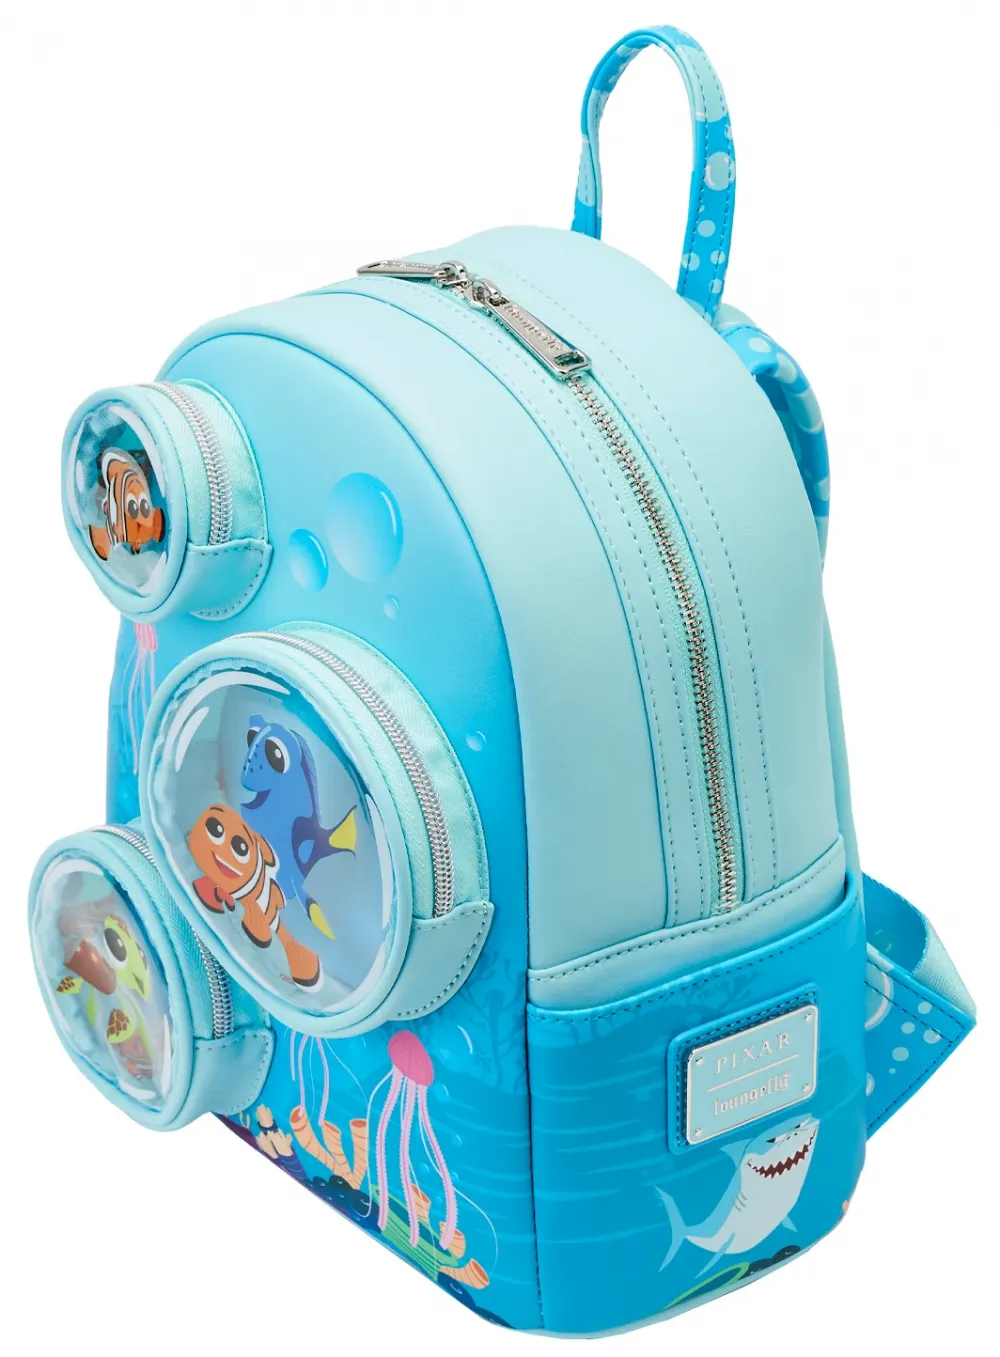 Finding Nemo 20th Anniversary Bubble Pocket Mini Backpack Loungefly